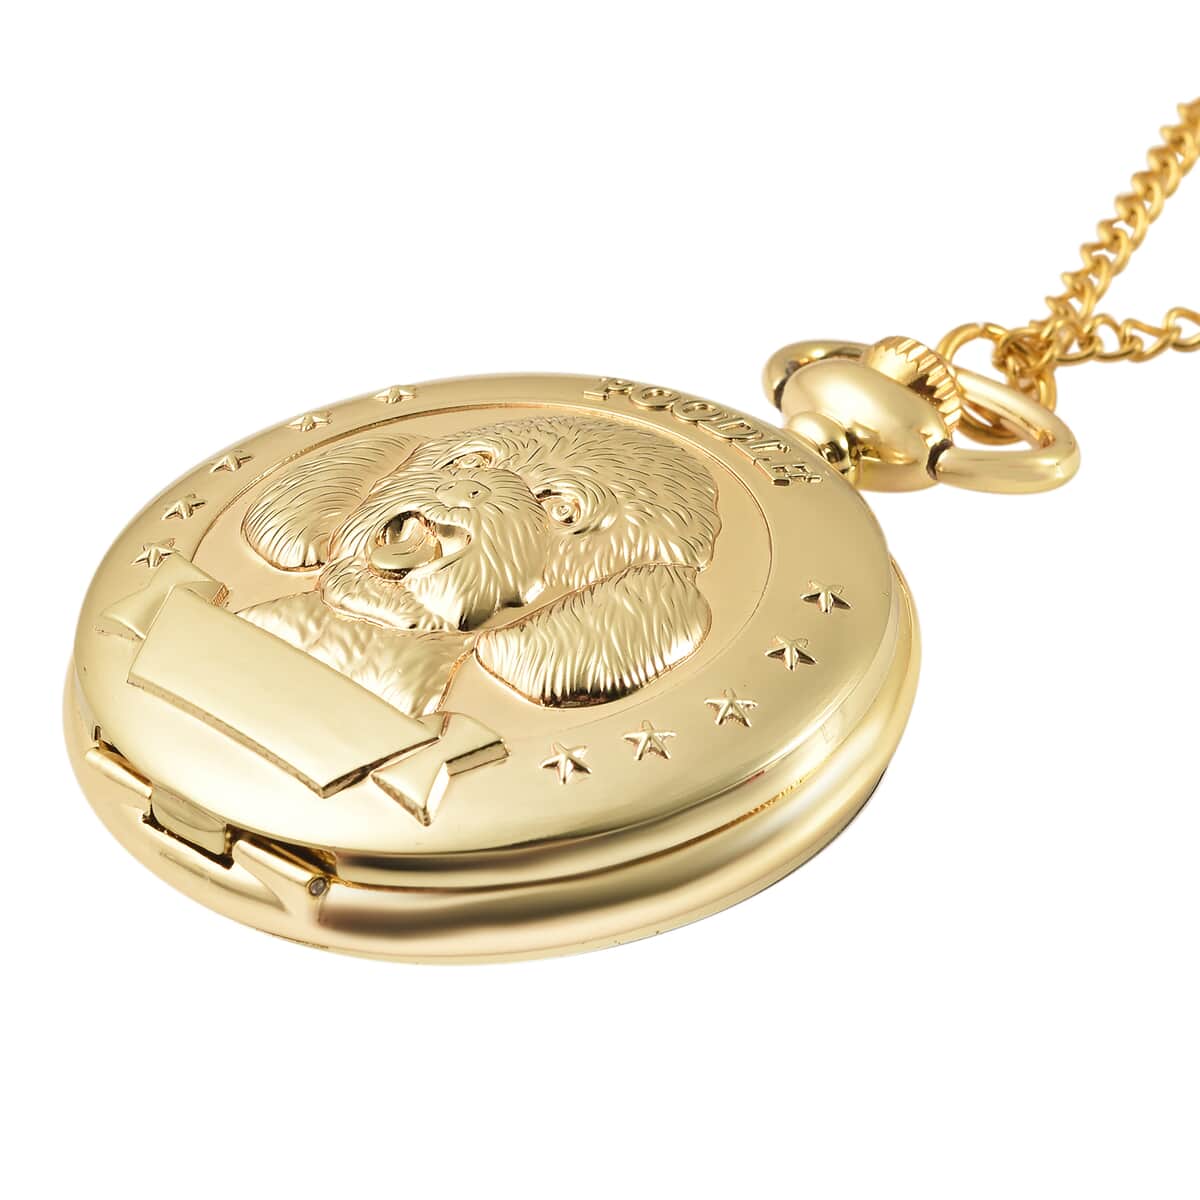 Strada Japanese Movement Poodle Pocket Watch in Goldtone with Chain (31 Inches) image number 2